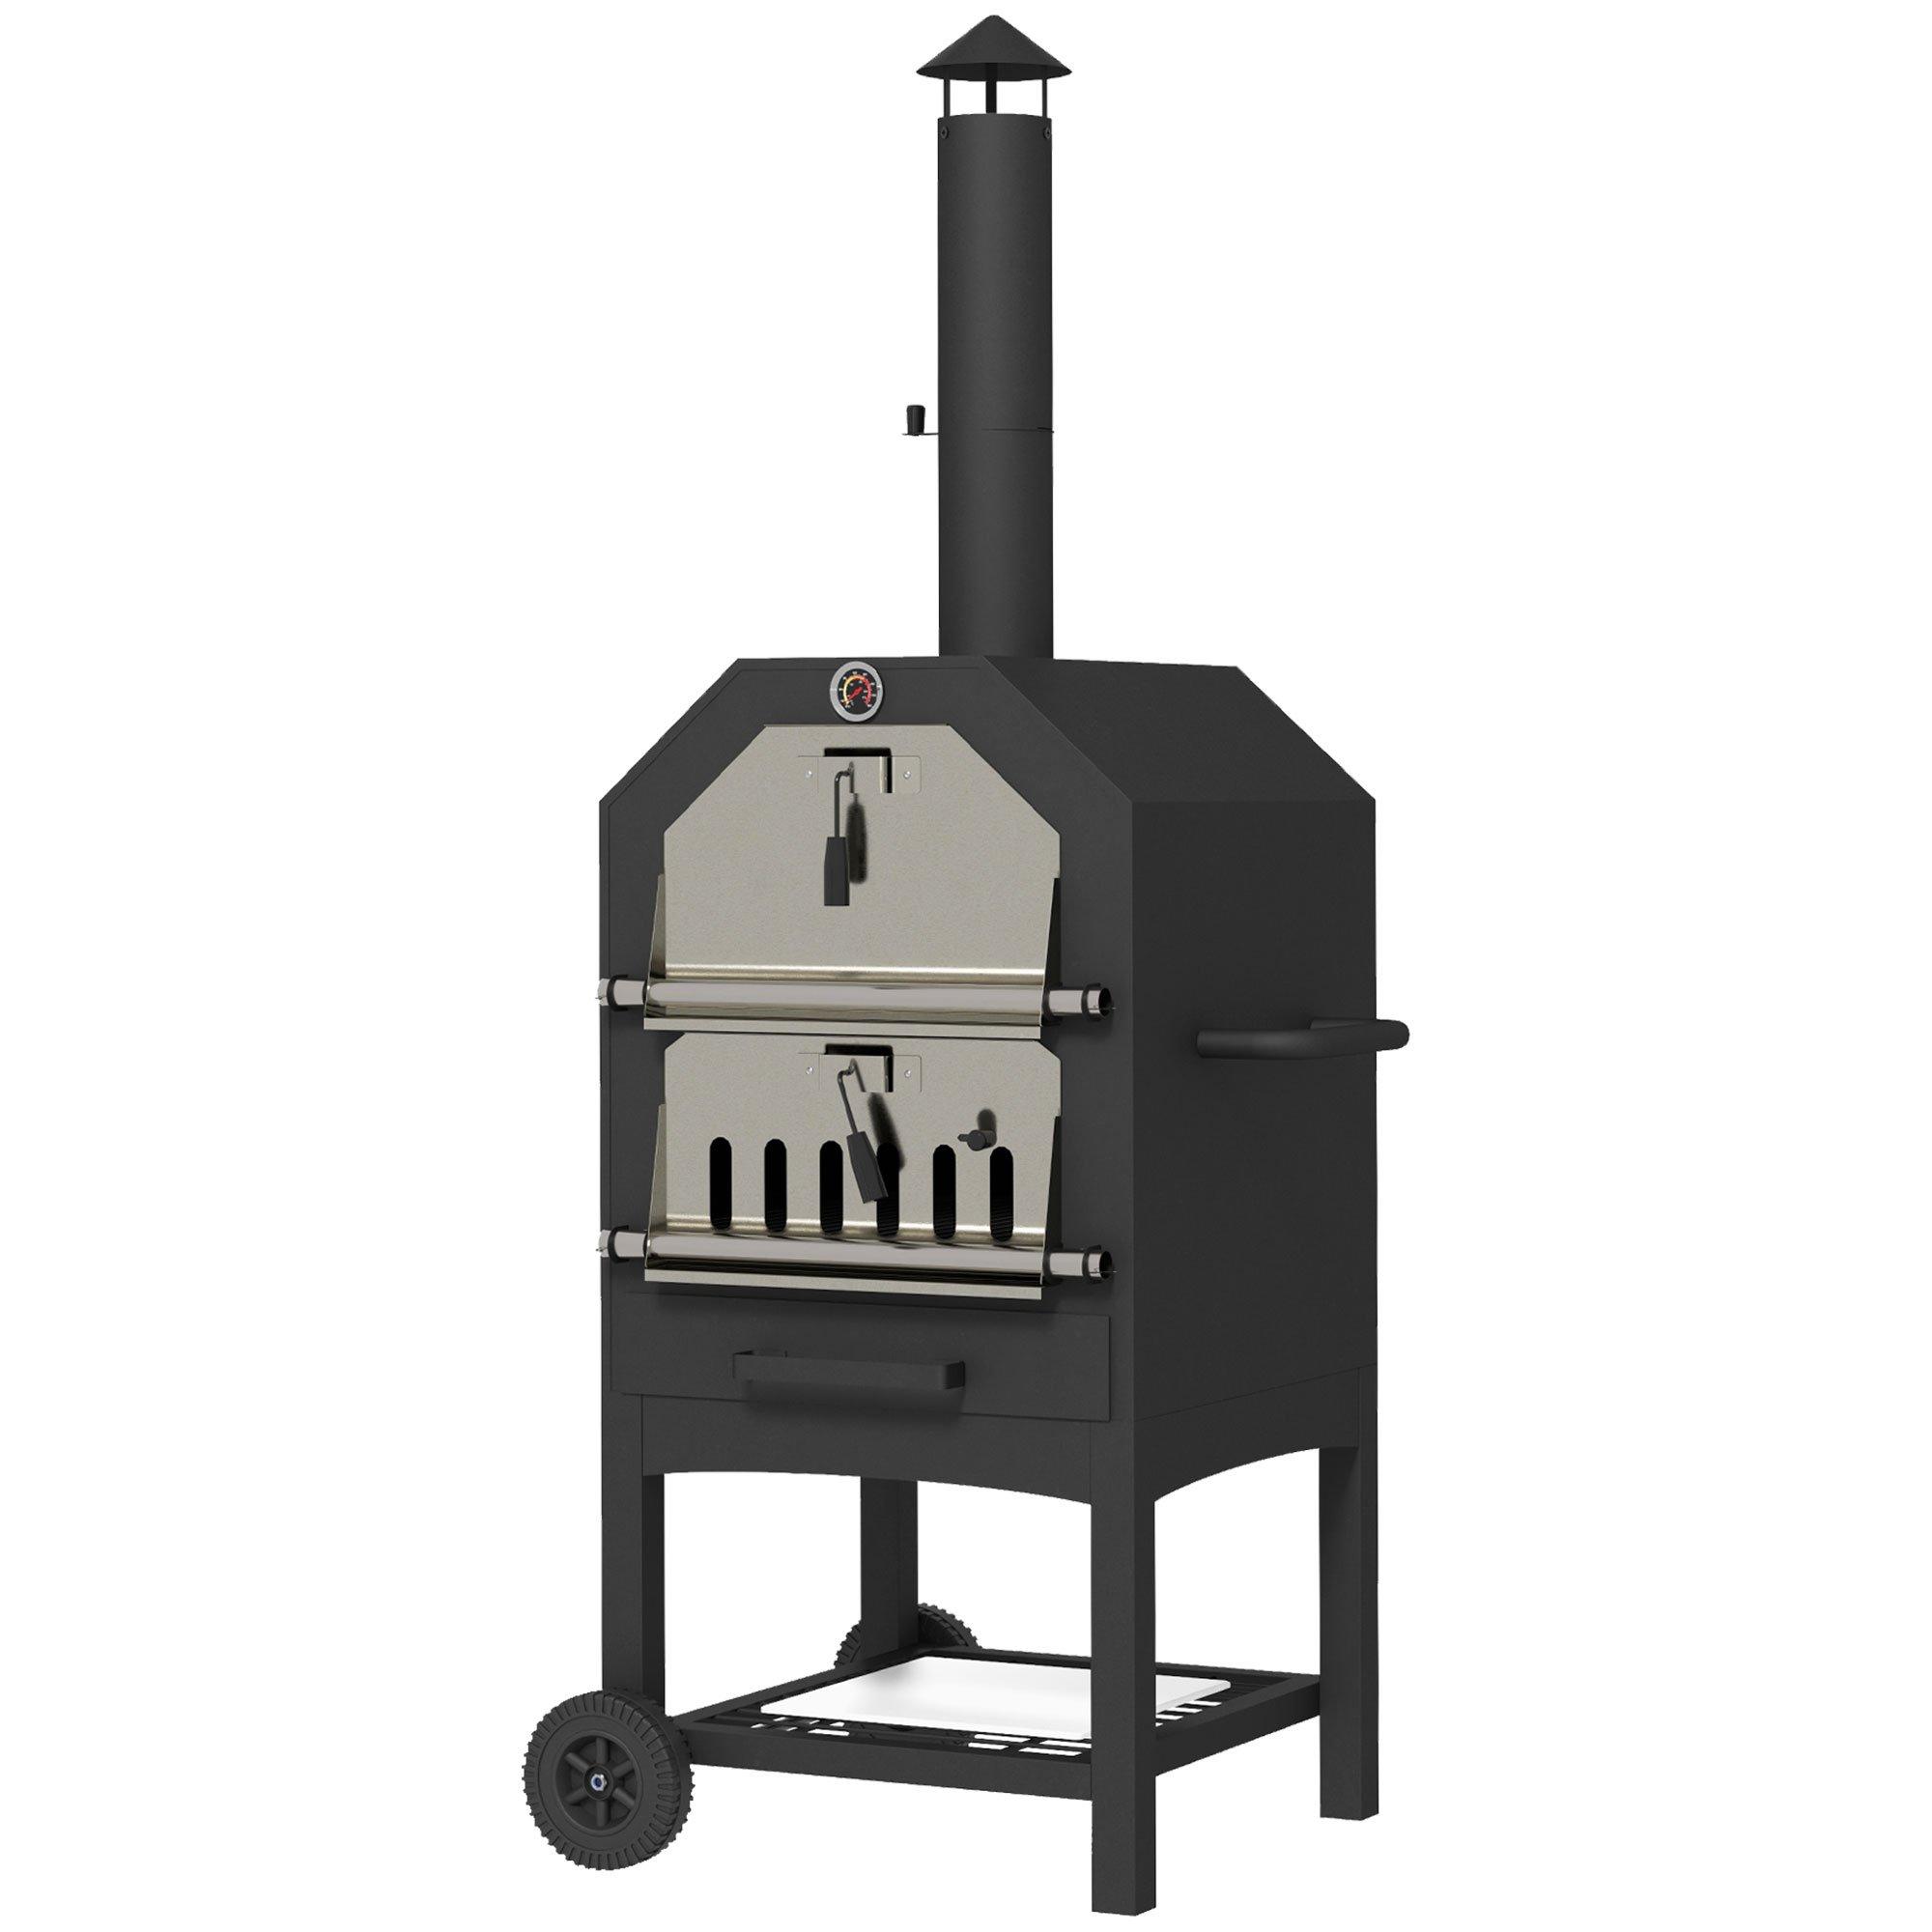 Outdoor Pizza Oven Charcoal Grill with Rain Cover, Shelf and Wheels